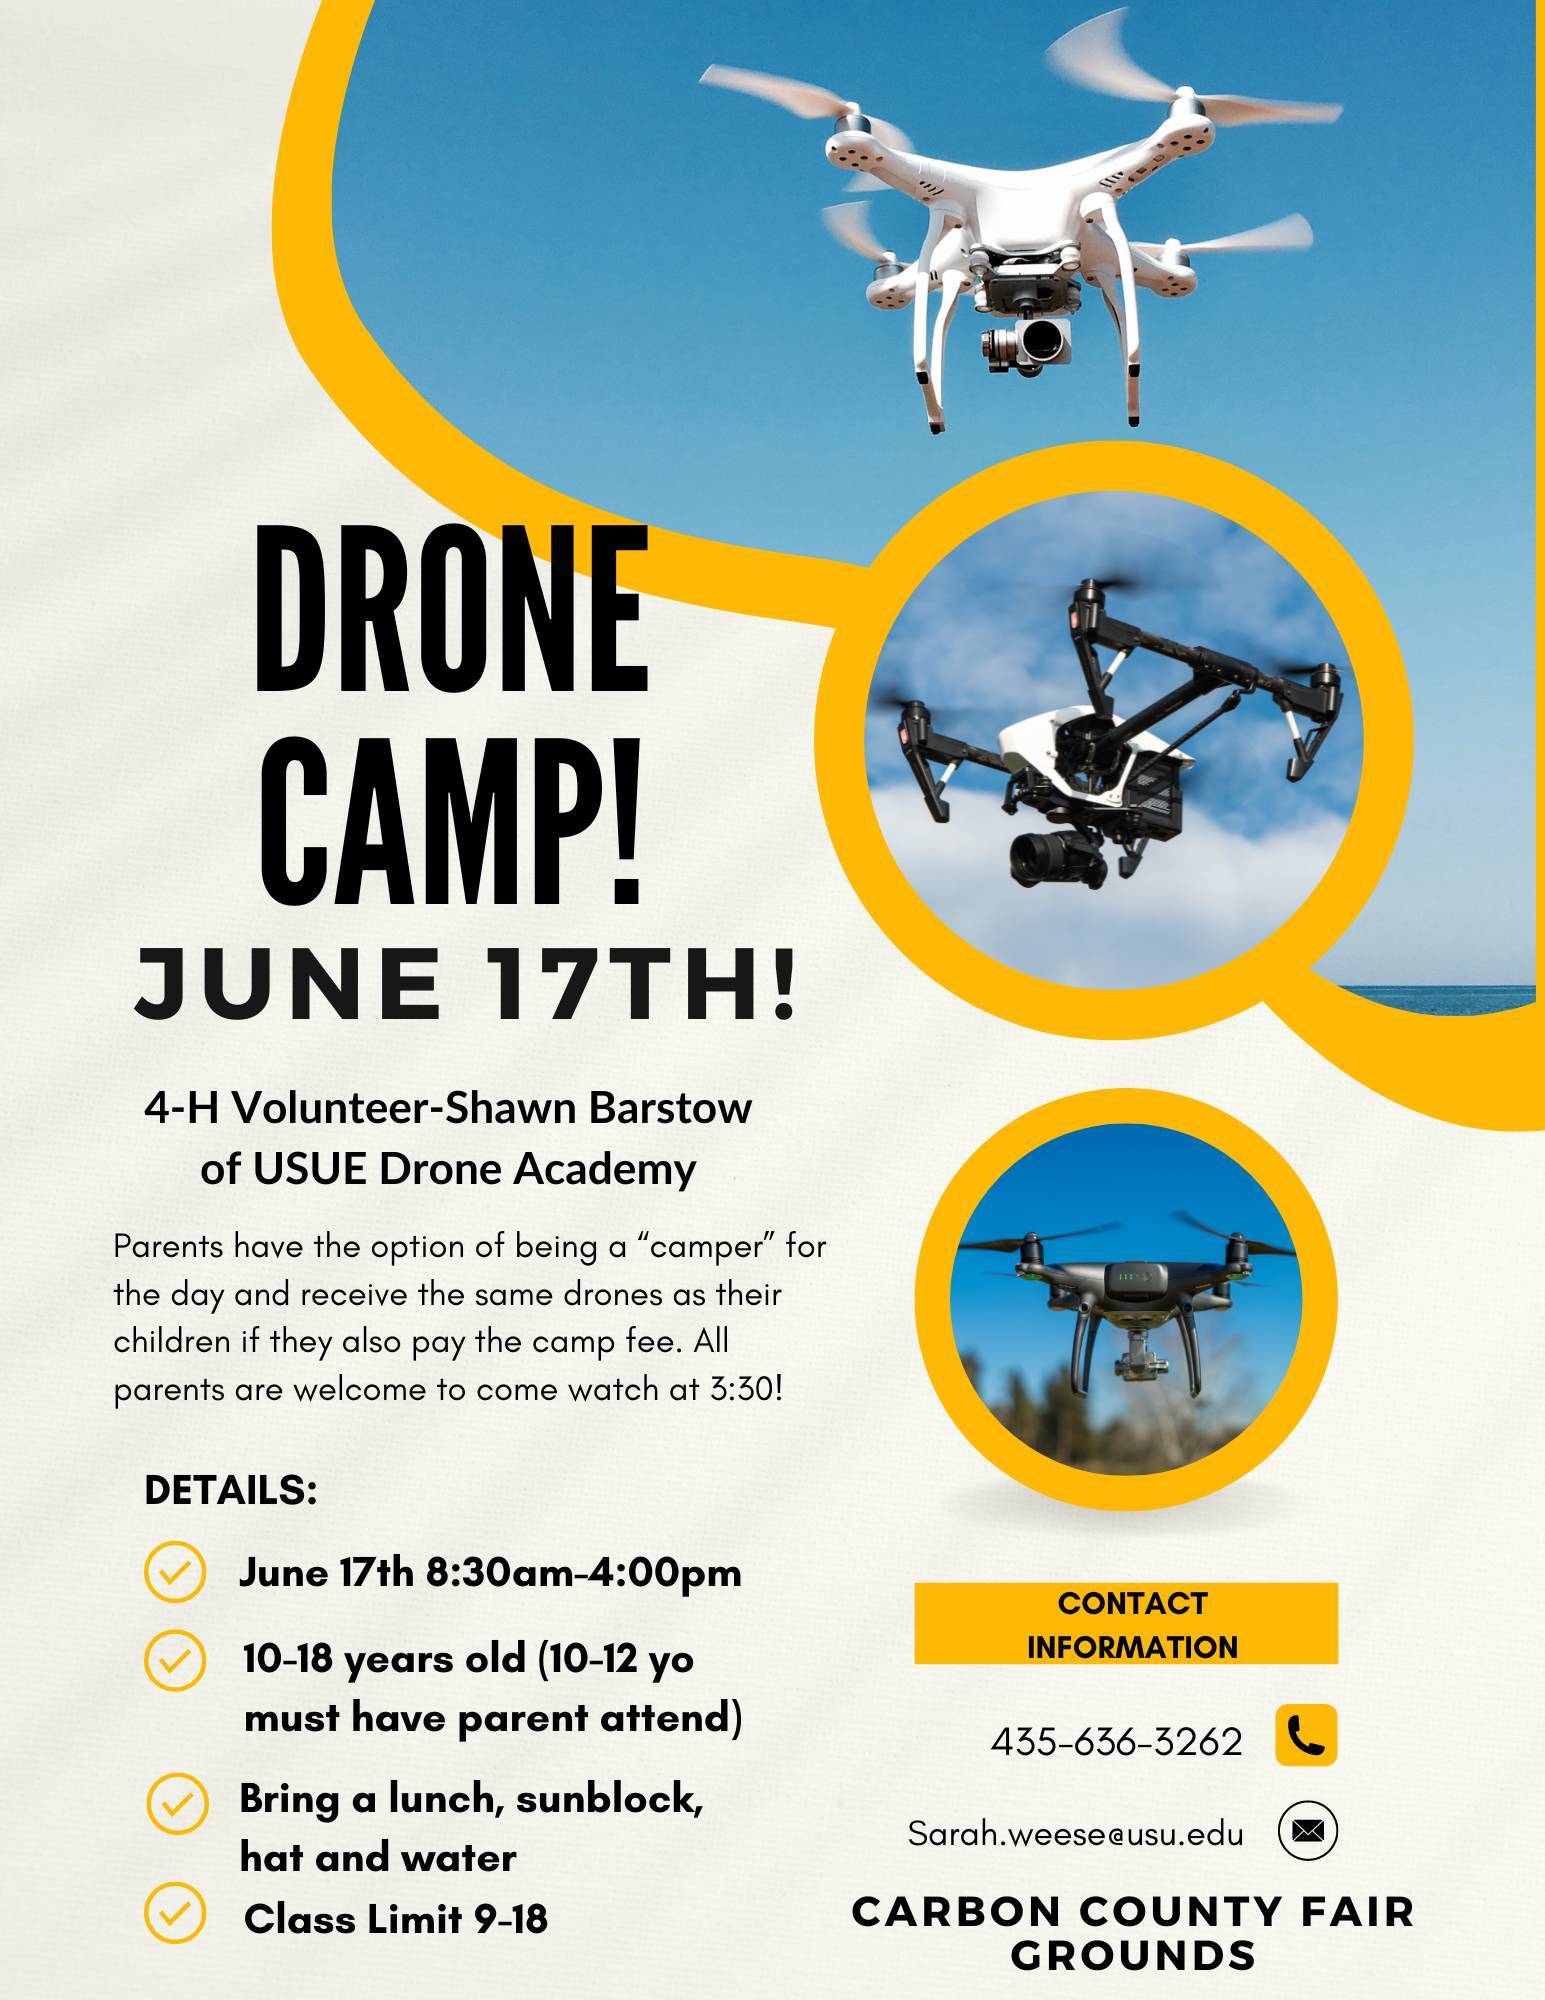 White-and-Yellow-Modern-Drone-Service-Flyer-1.jpg